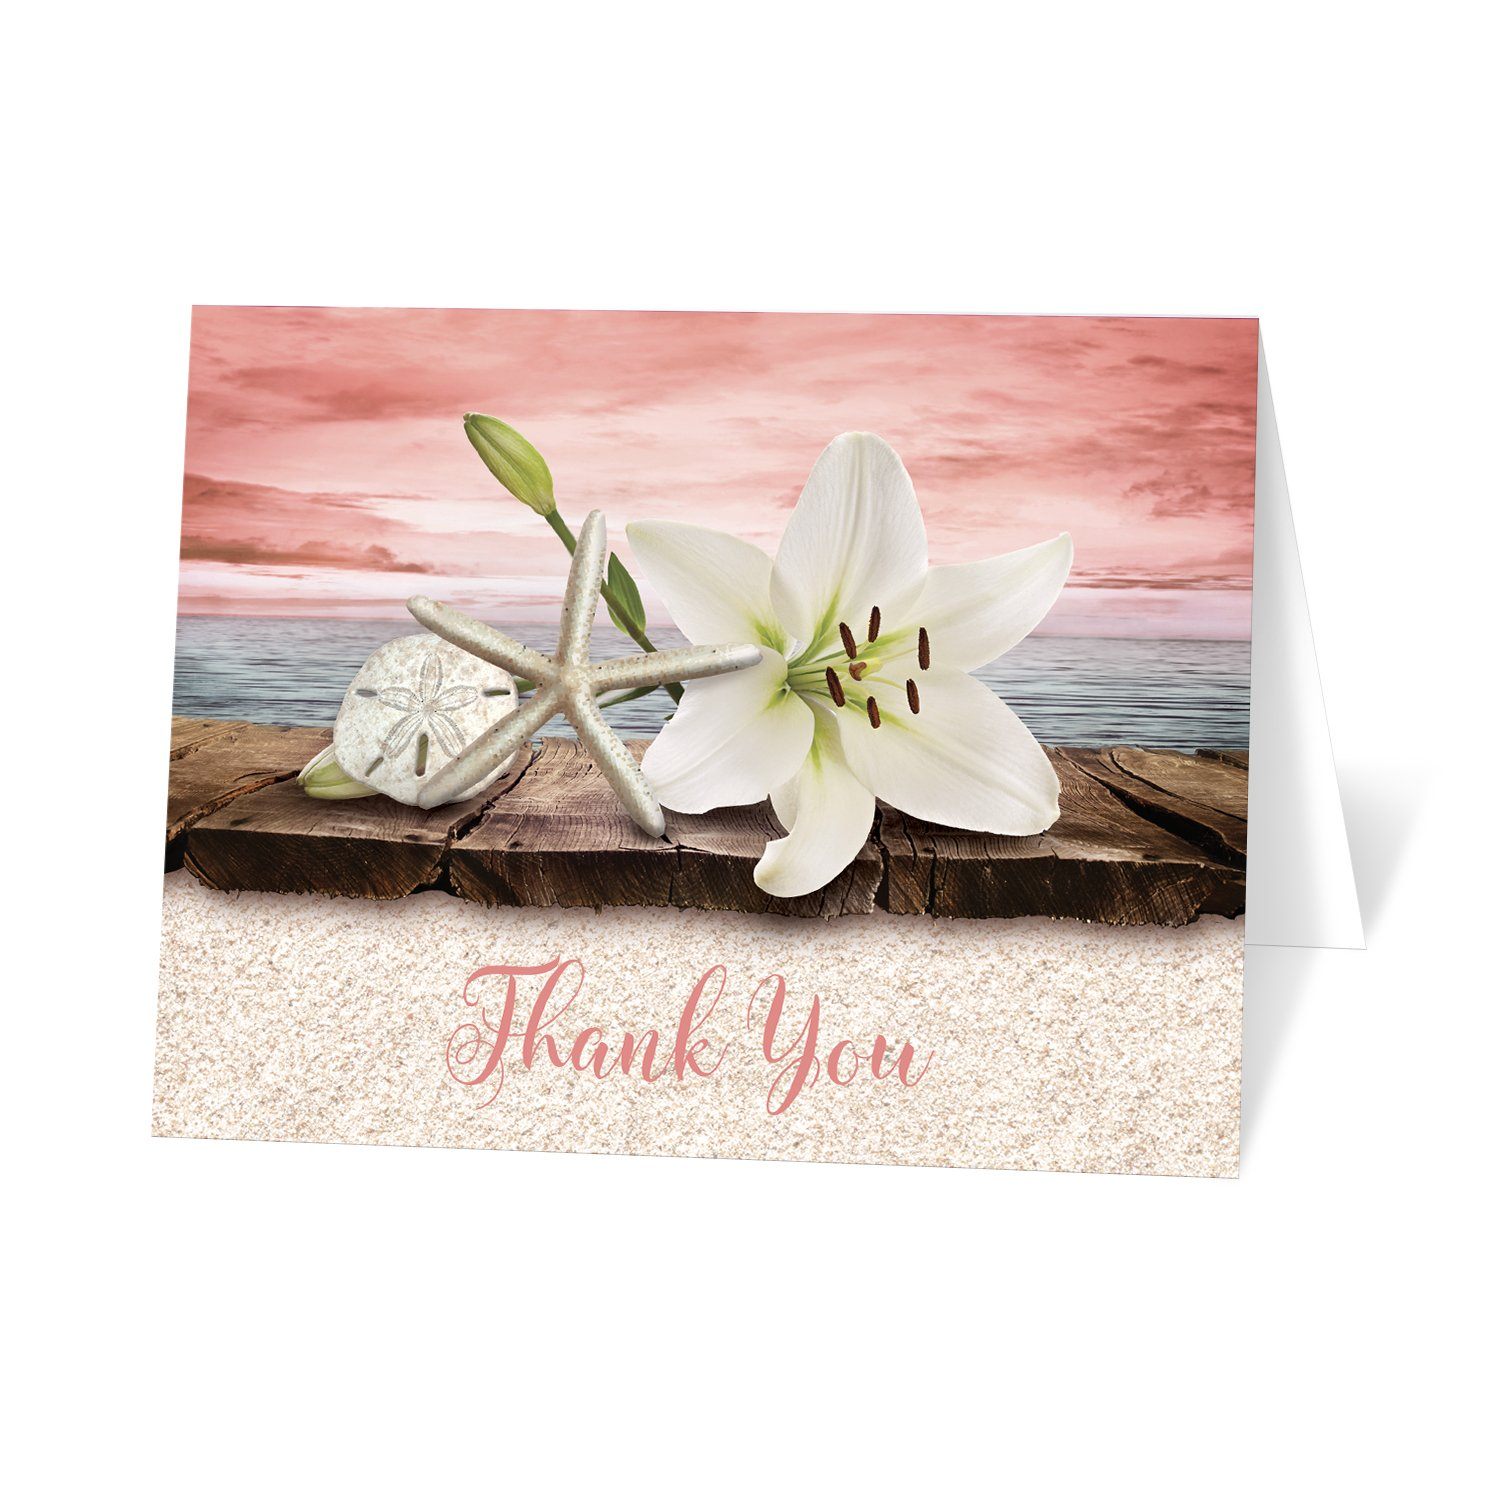 Lily Seashells and Sand Coral Beach Thank You Cards at Artistically Invited